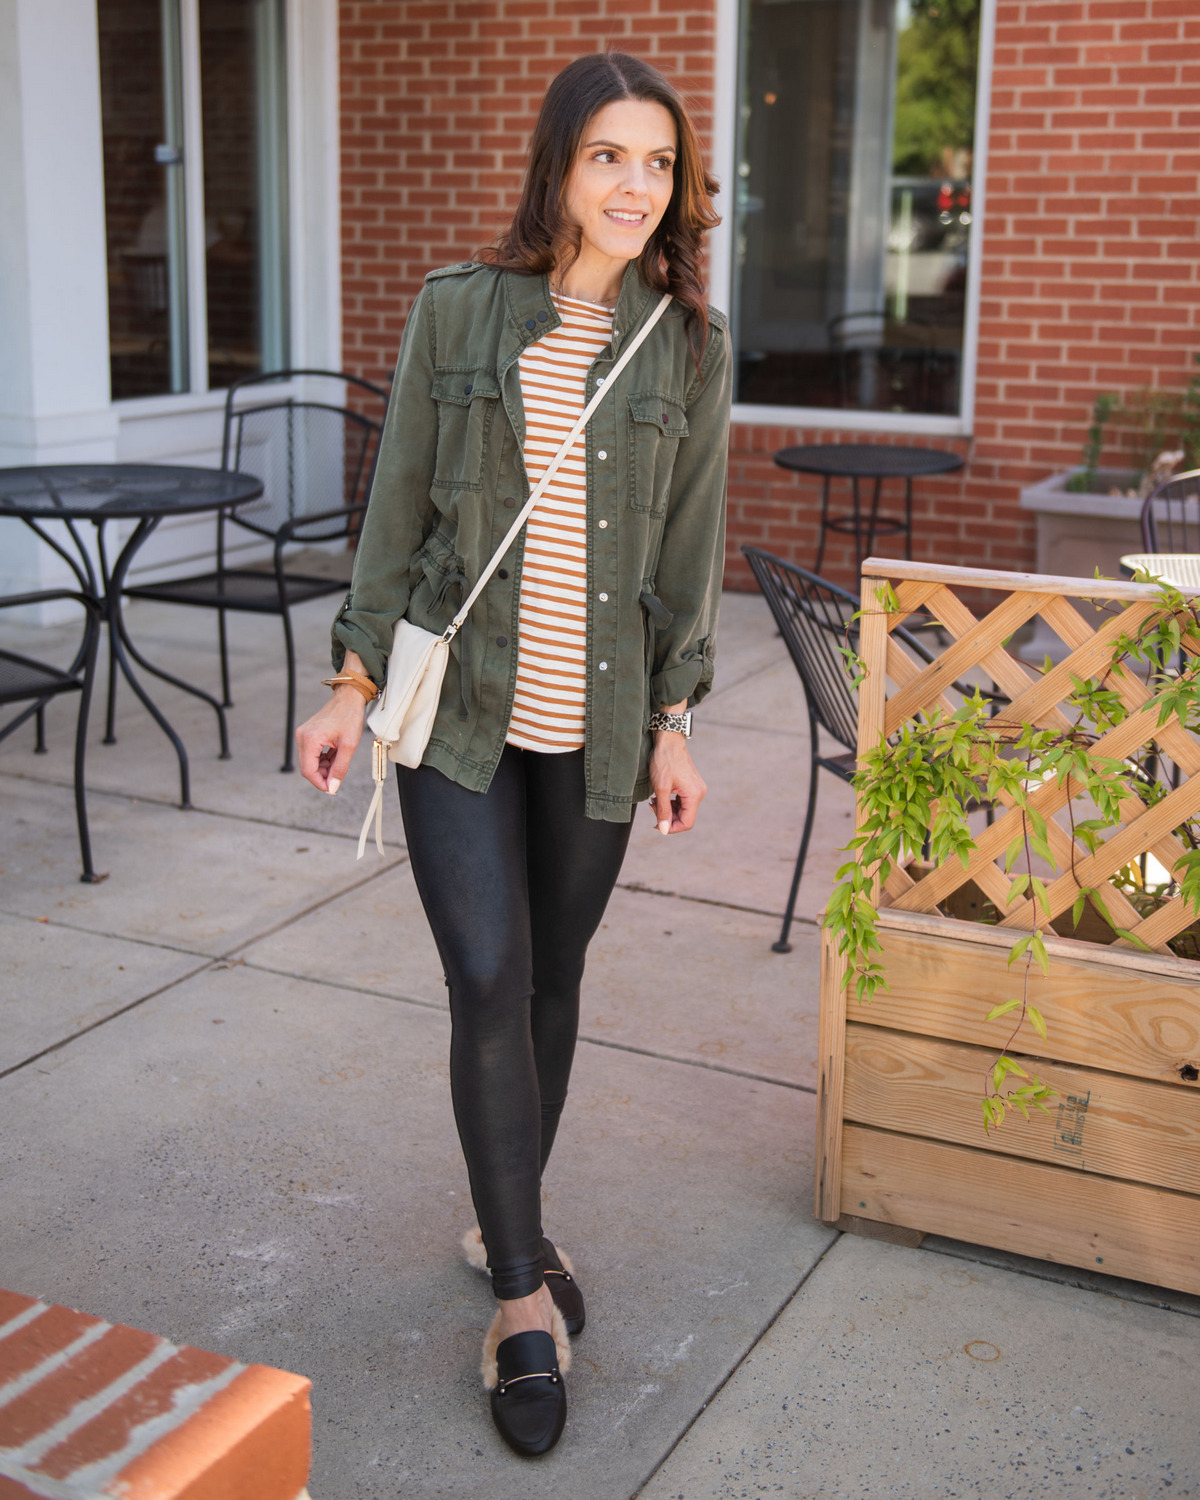 Comfortable Mules, Leather Leggings, A T-Shirt, And Blazer